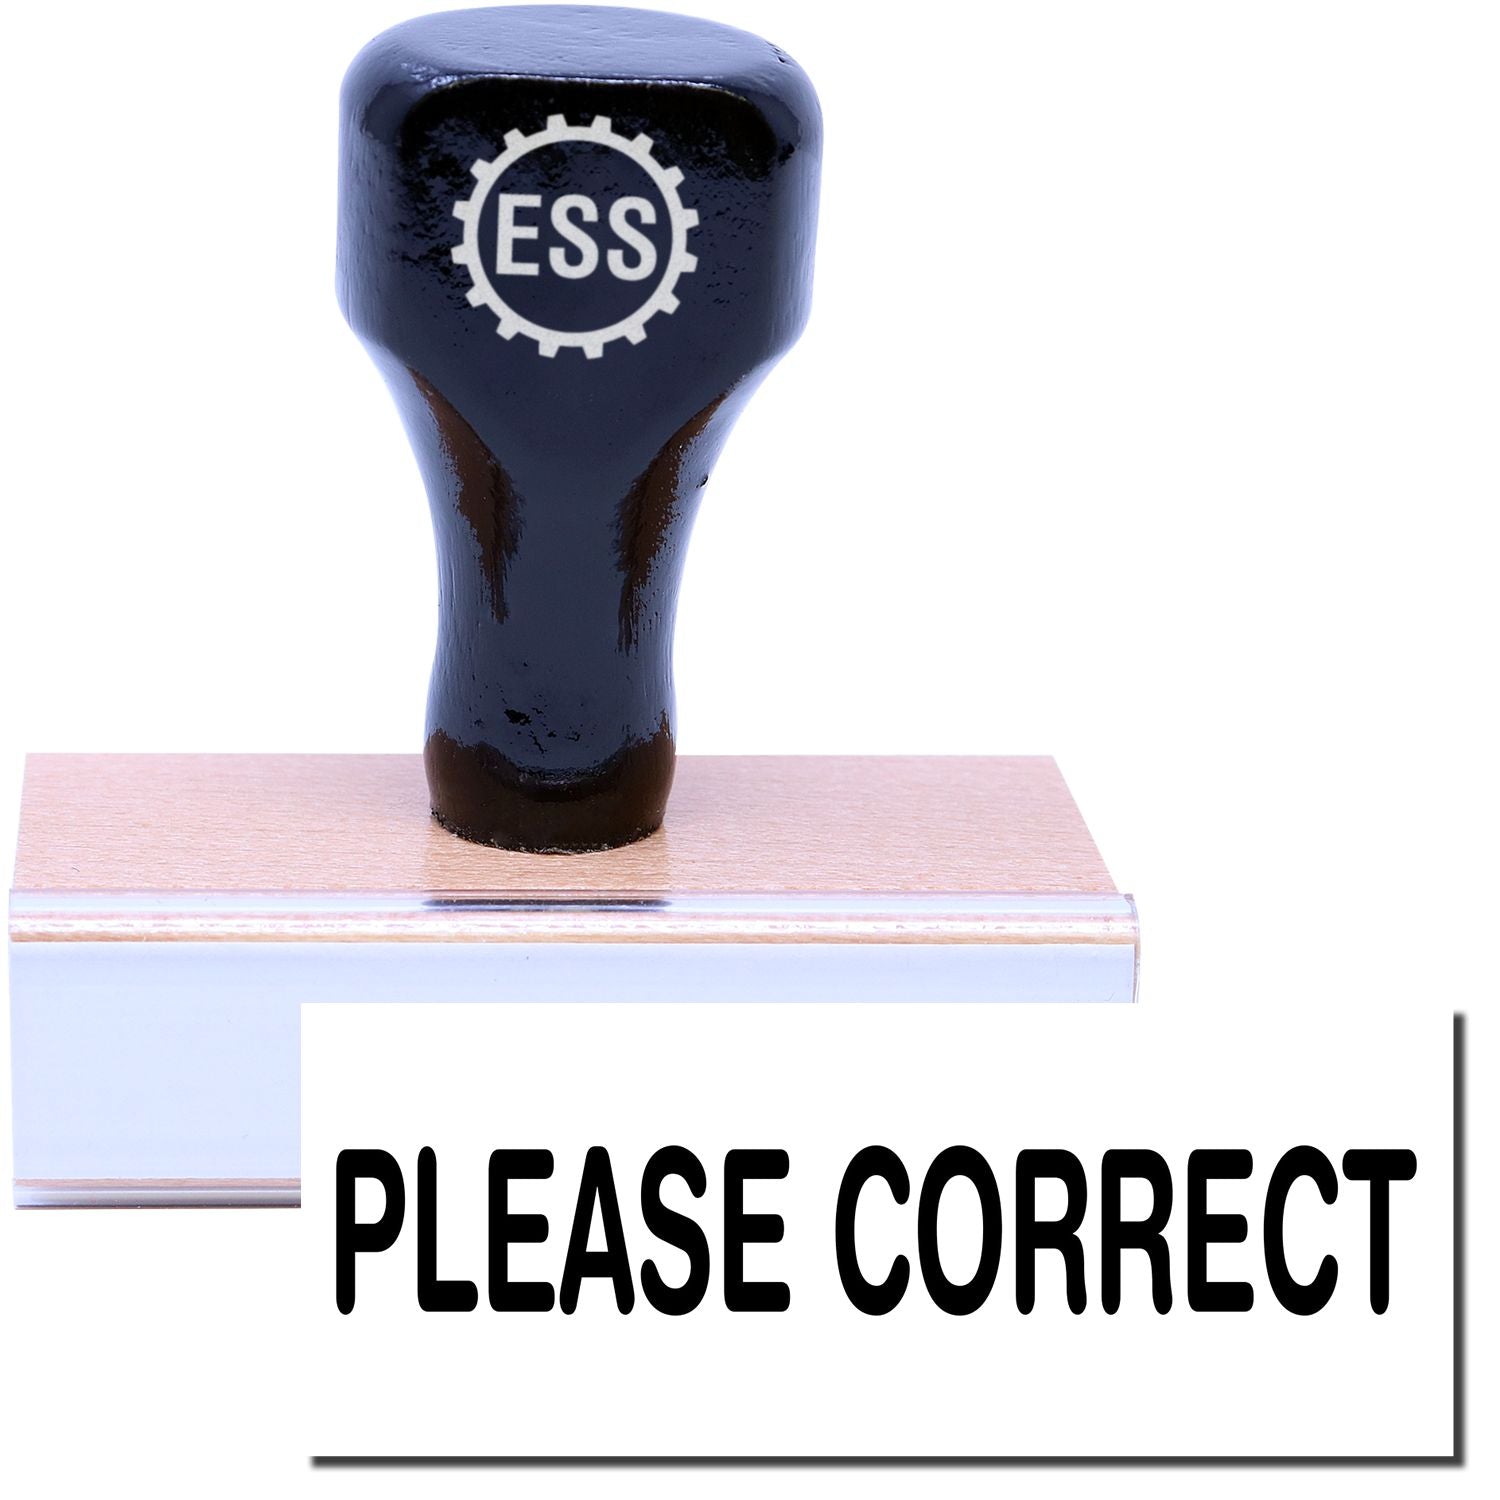 A stock office rubber stamp with a stamped image showing how the text "PLEASE CORRECT" in a large font is displayed after stamping.